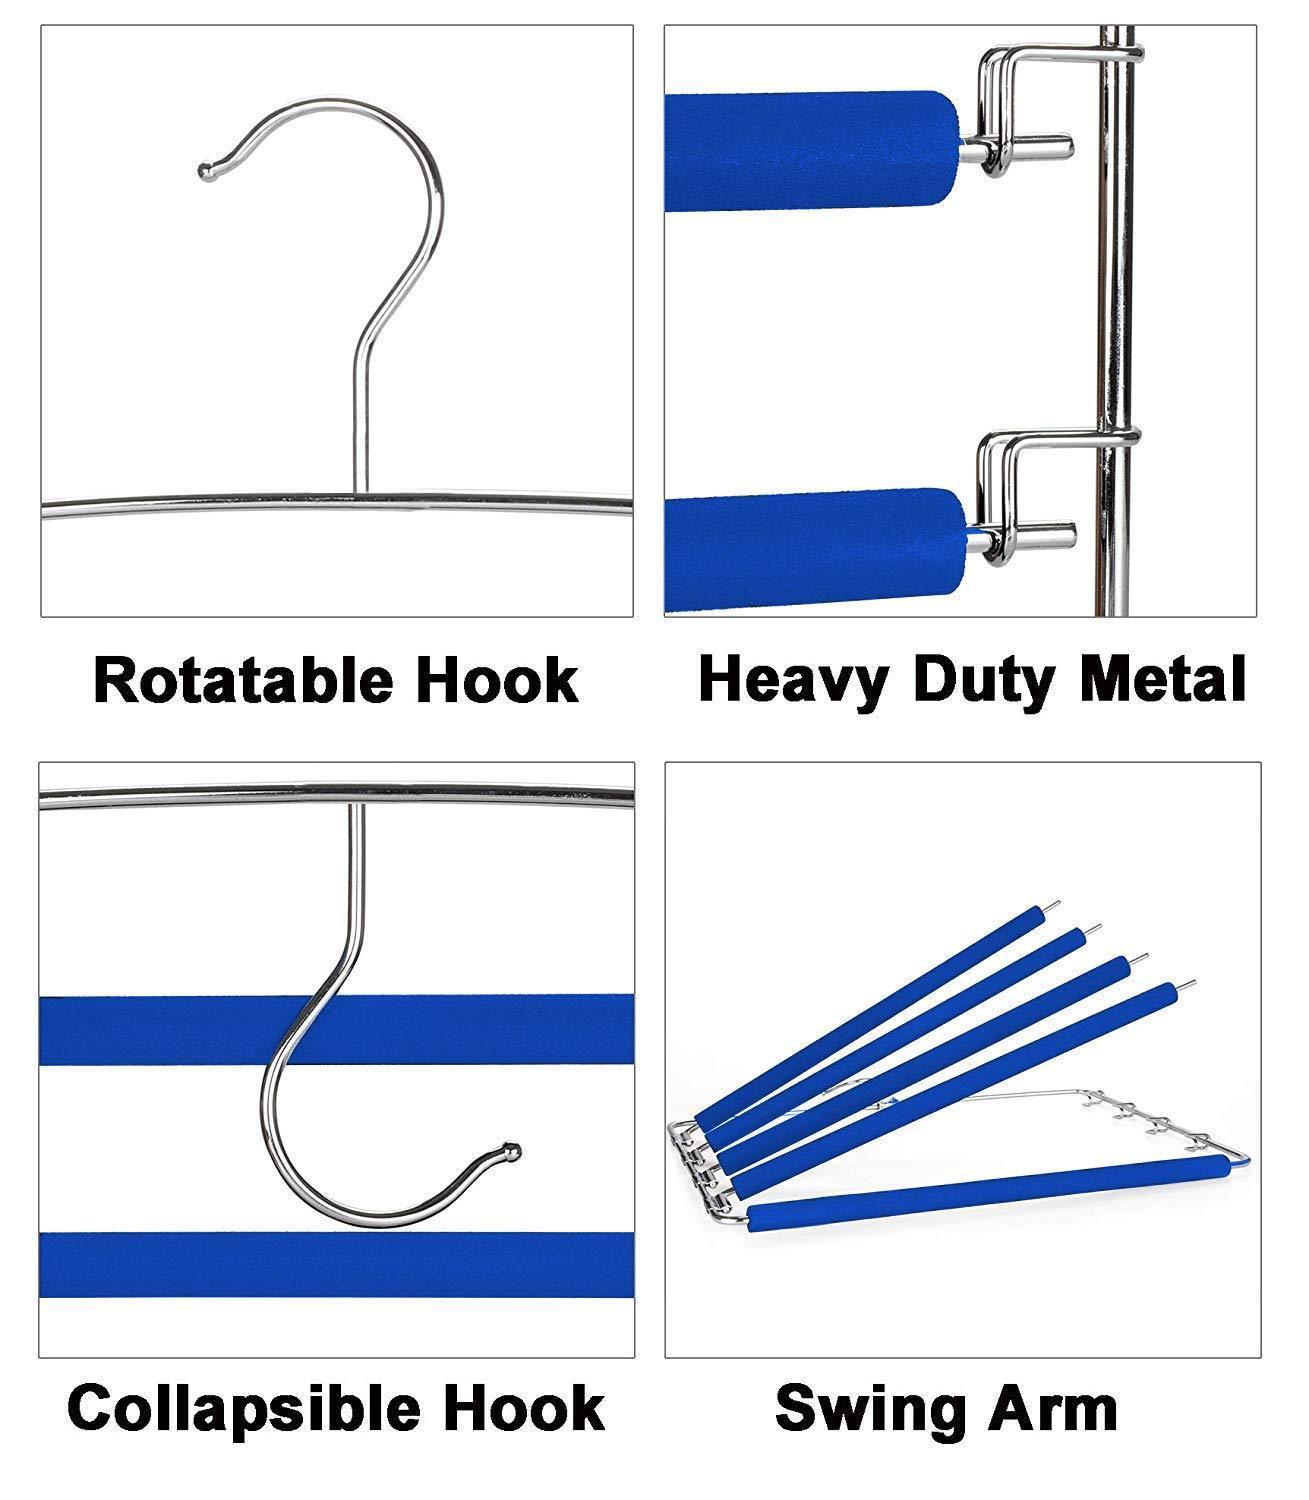 New rosinking slack hangers swing arm pants 2 pack multi layers removeable stainless steel scarf slack hangers non slip clothes rack with foam padded rotatable hook closet space saving organizer